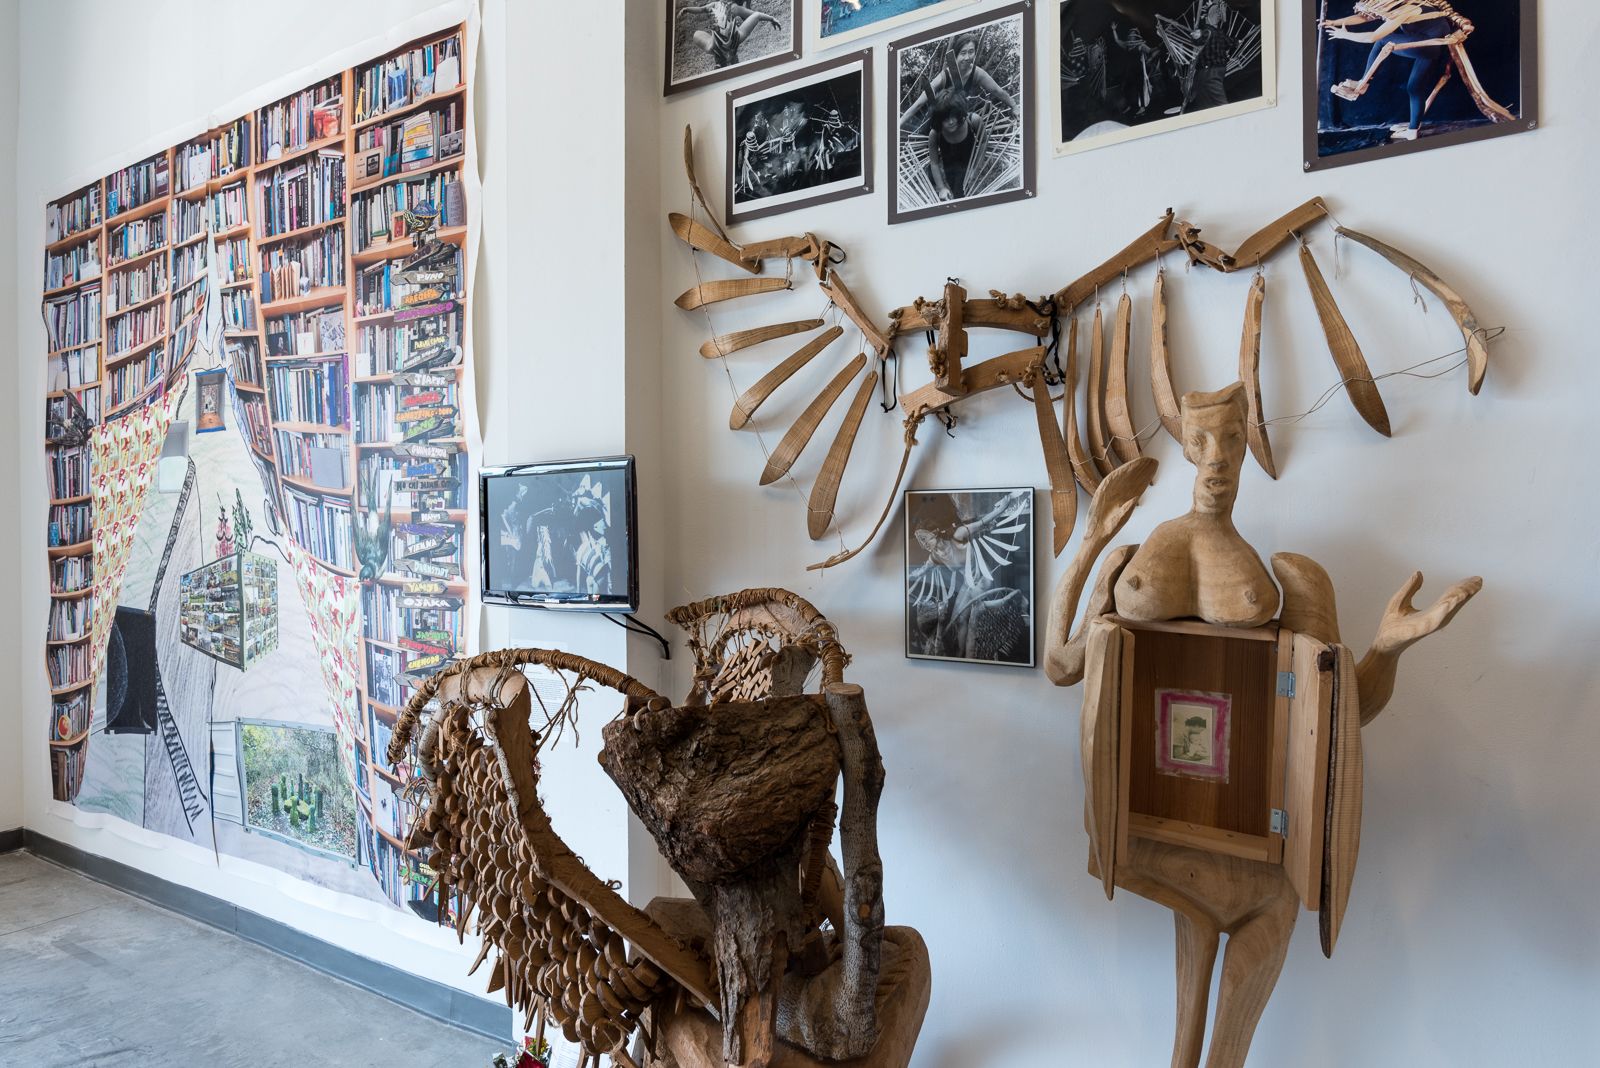 Different art sculptures and portraits displayed in a gallery space.